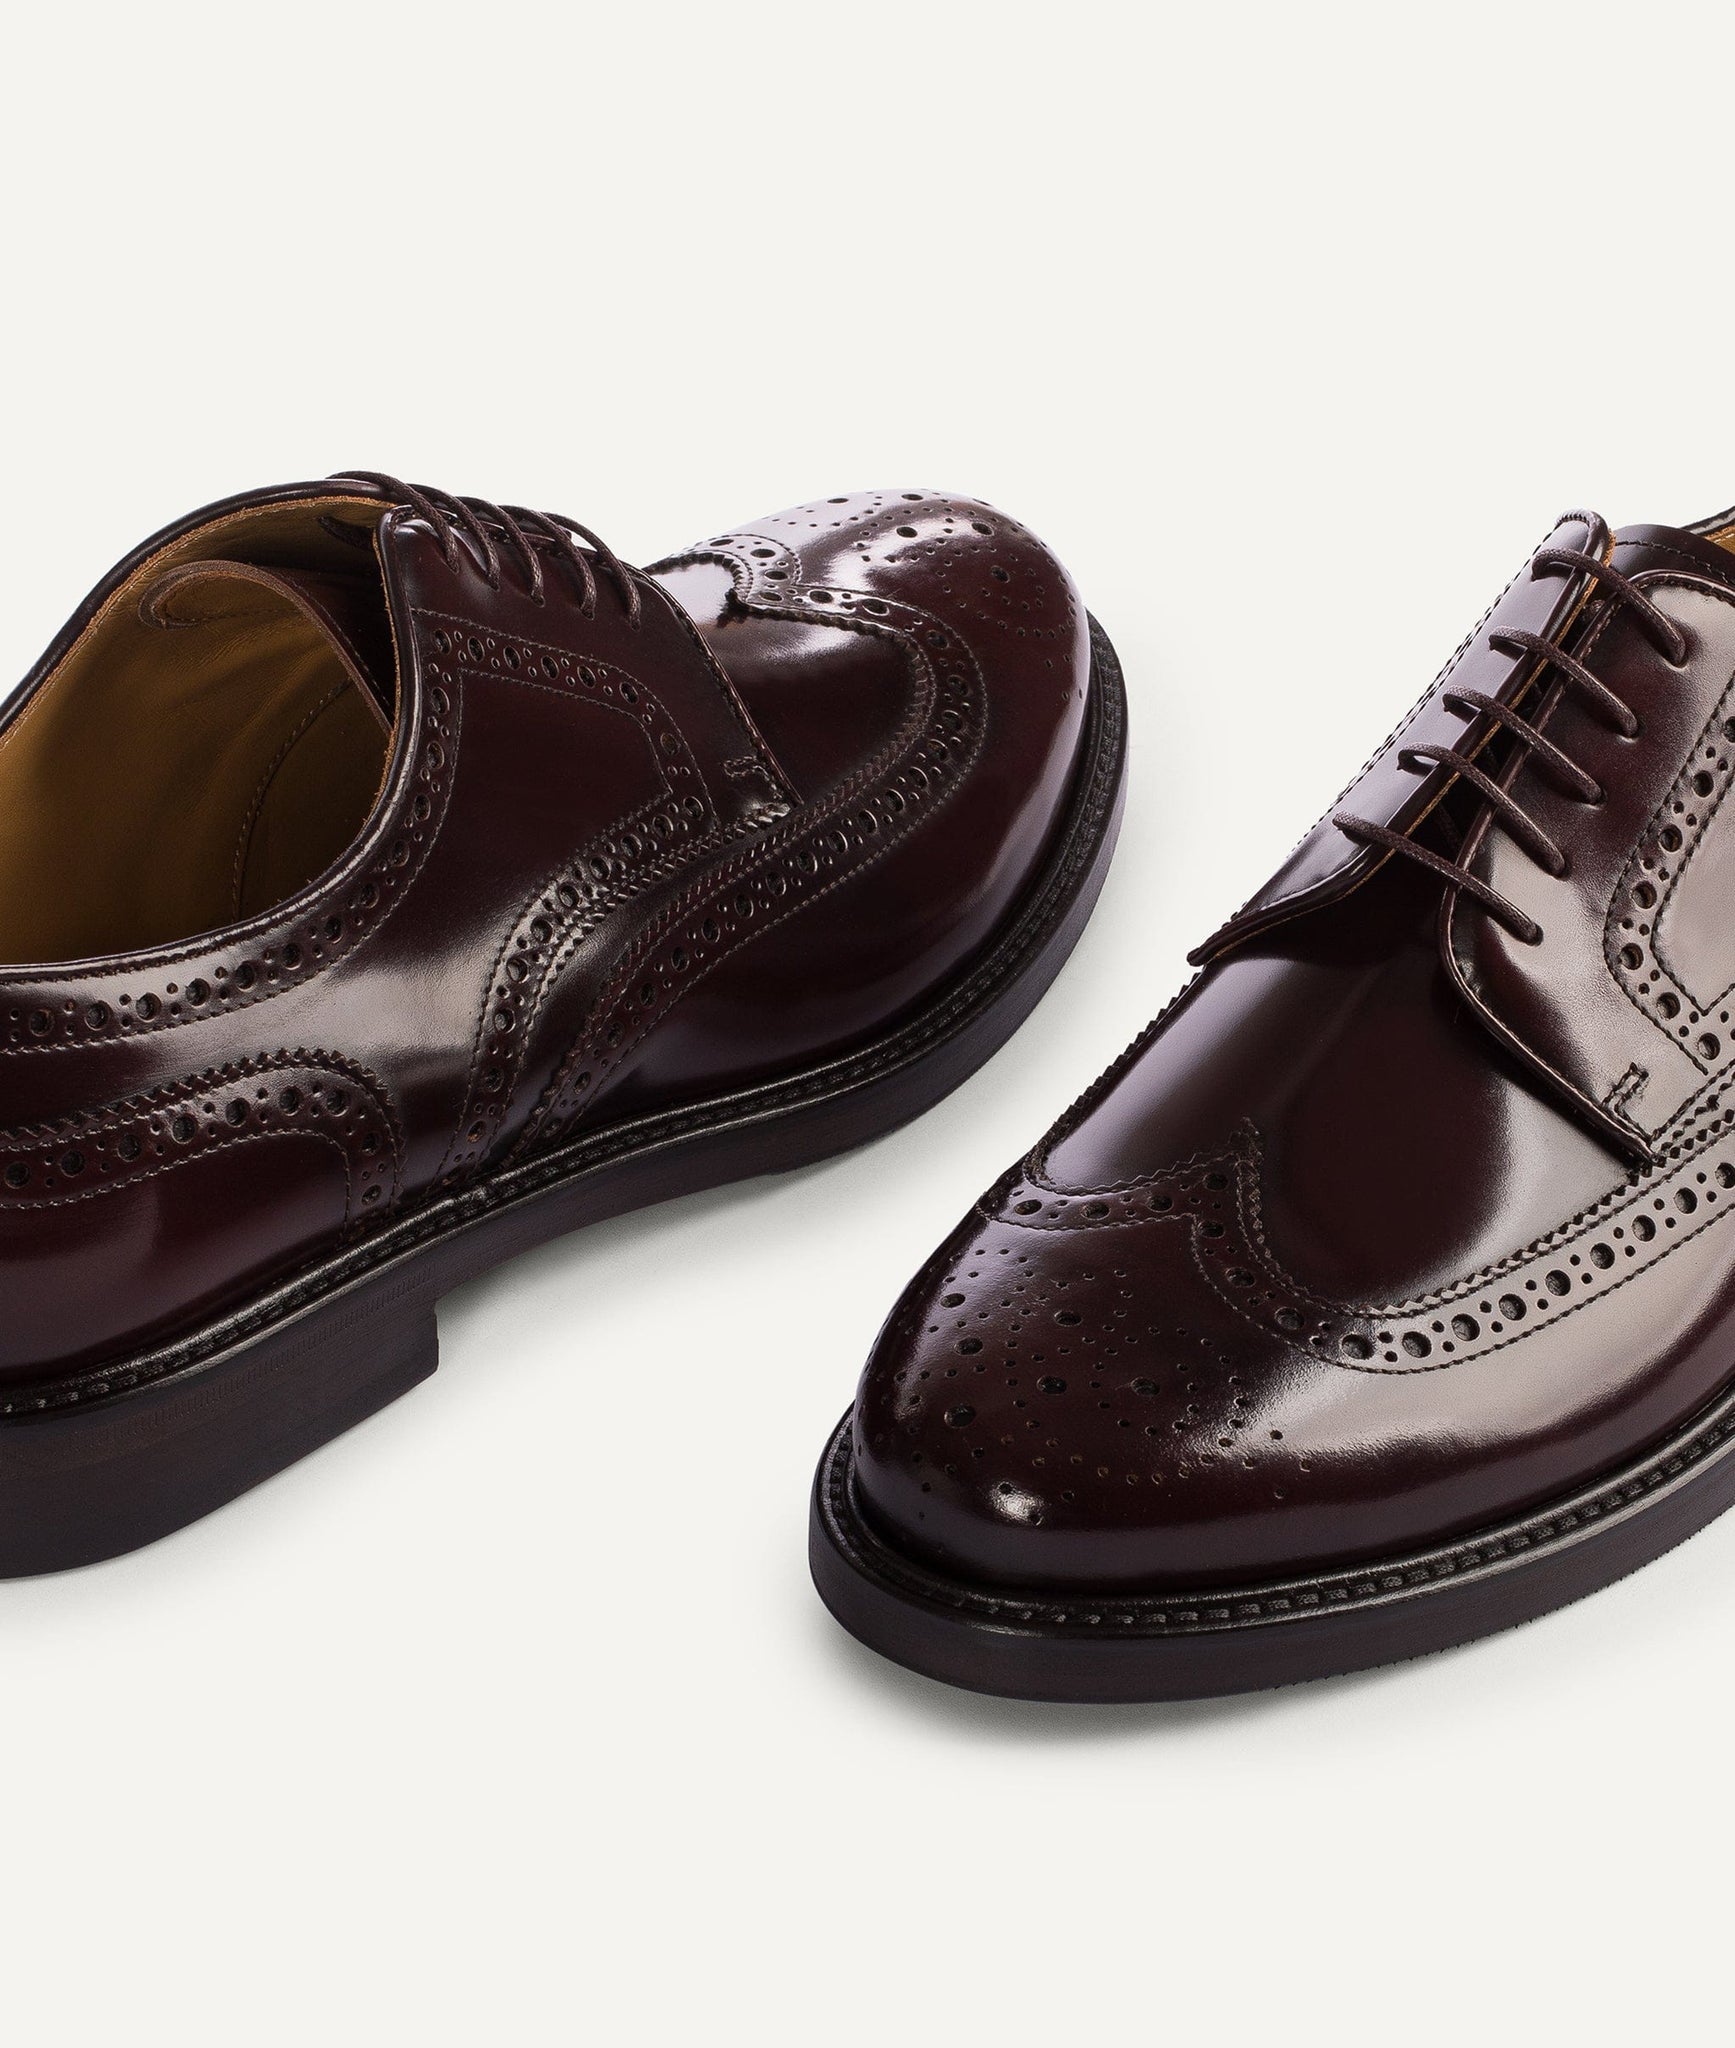 Derby Full Brogue in Calf Leather